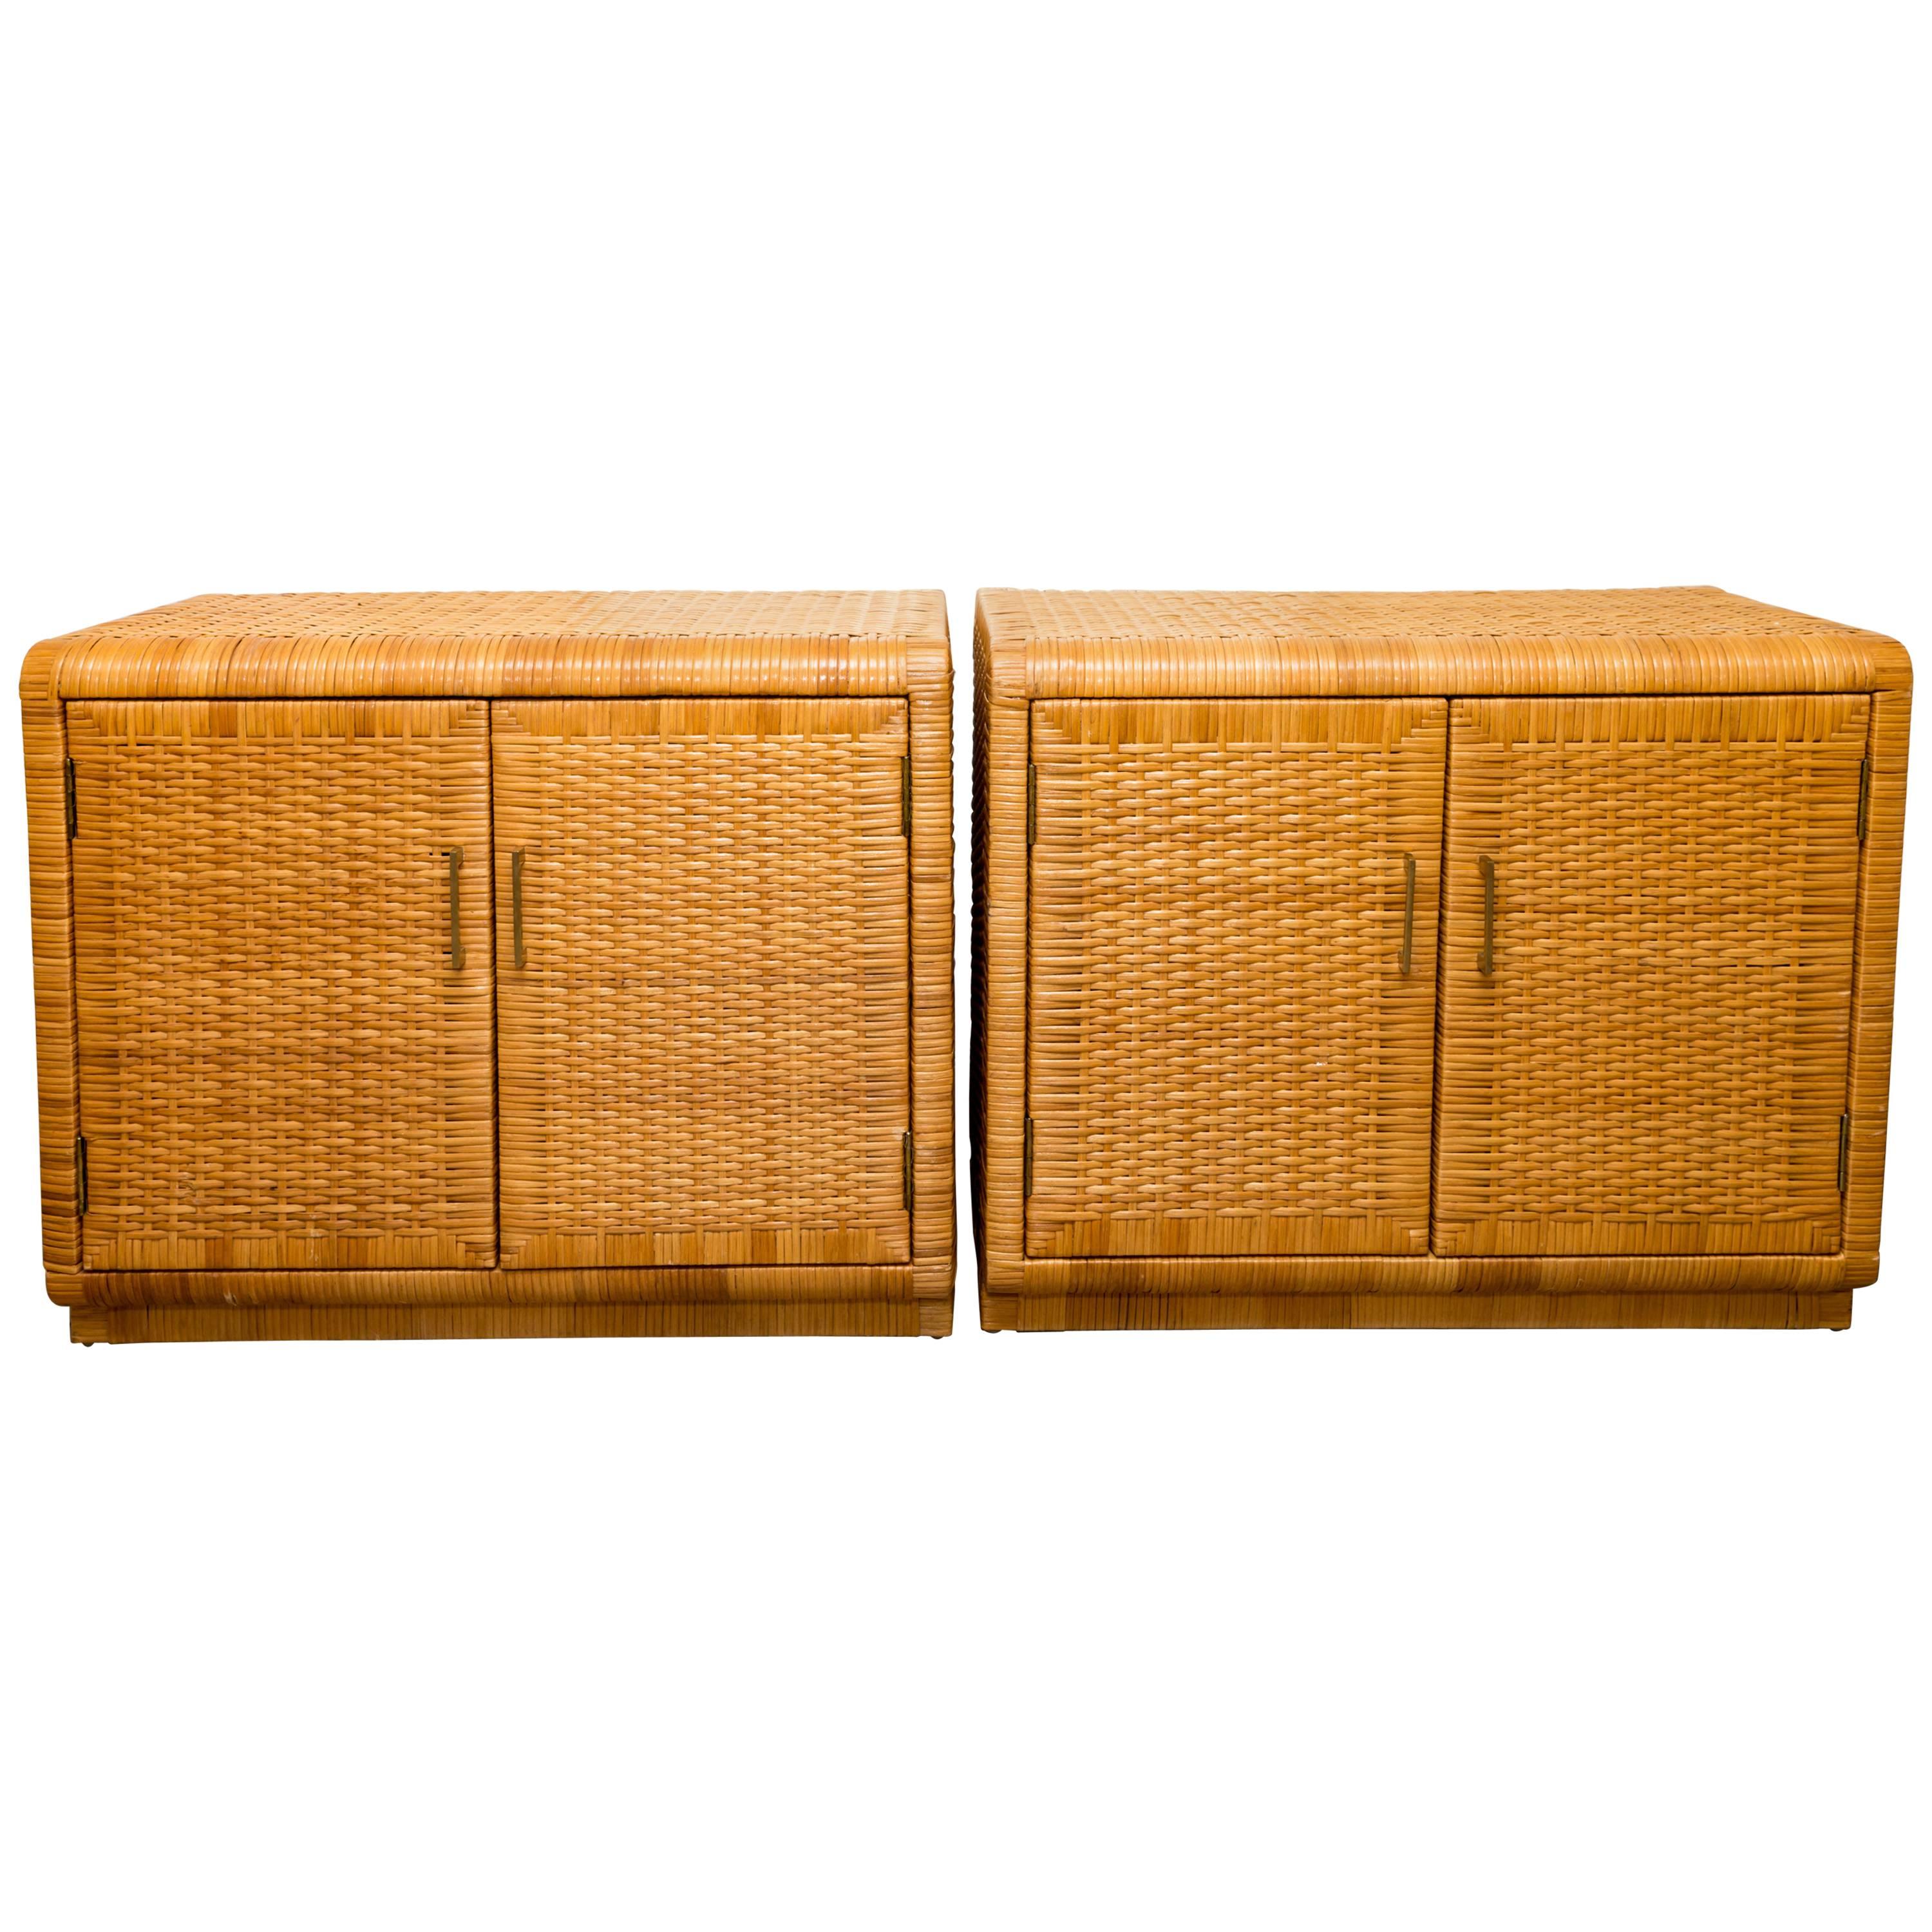 Pair of Rattan Cabinets with Interior Glass Shelf and Brass Detail